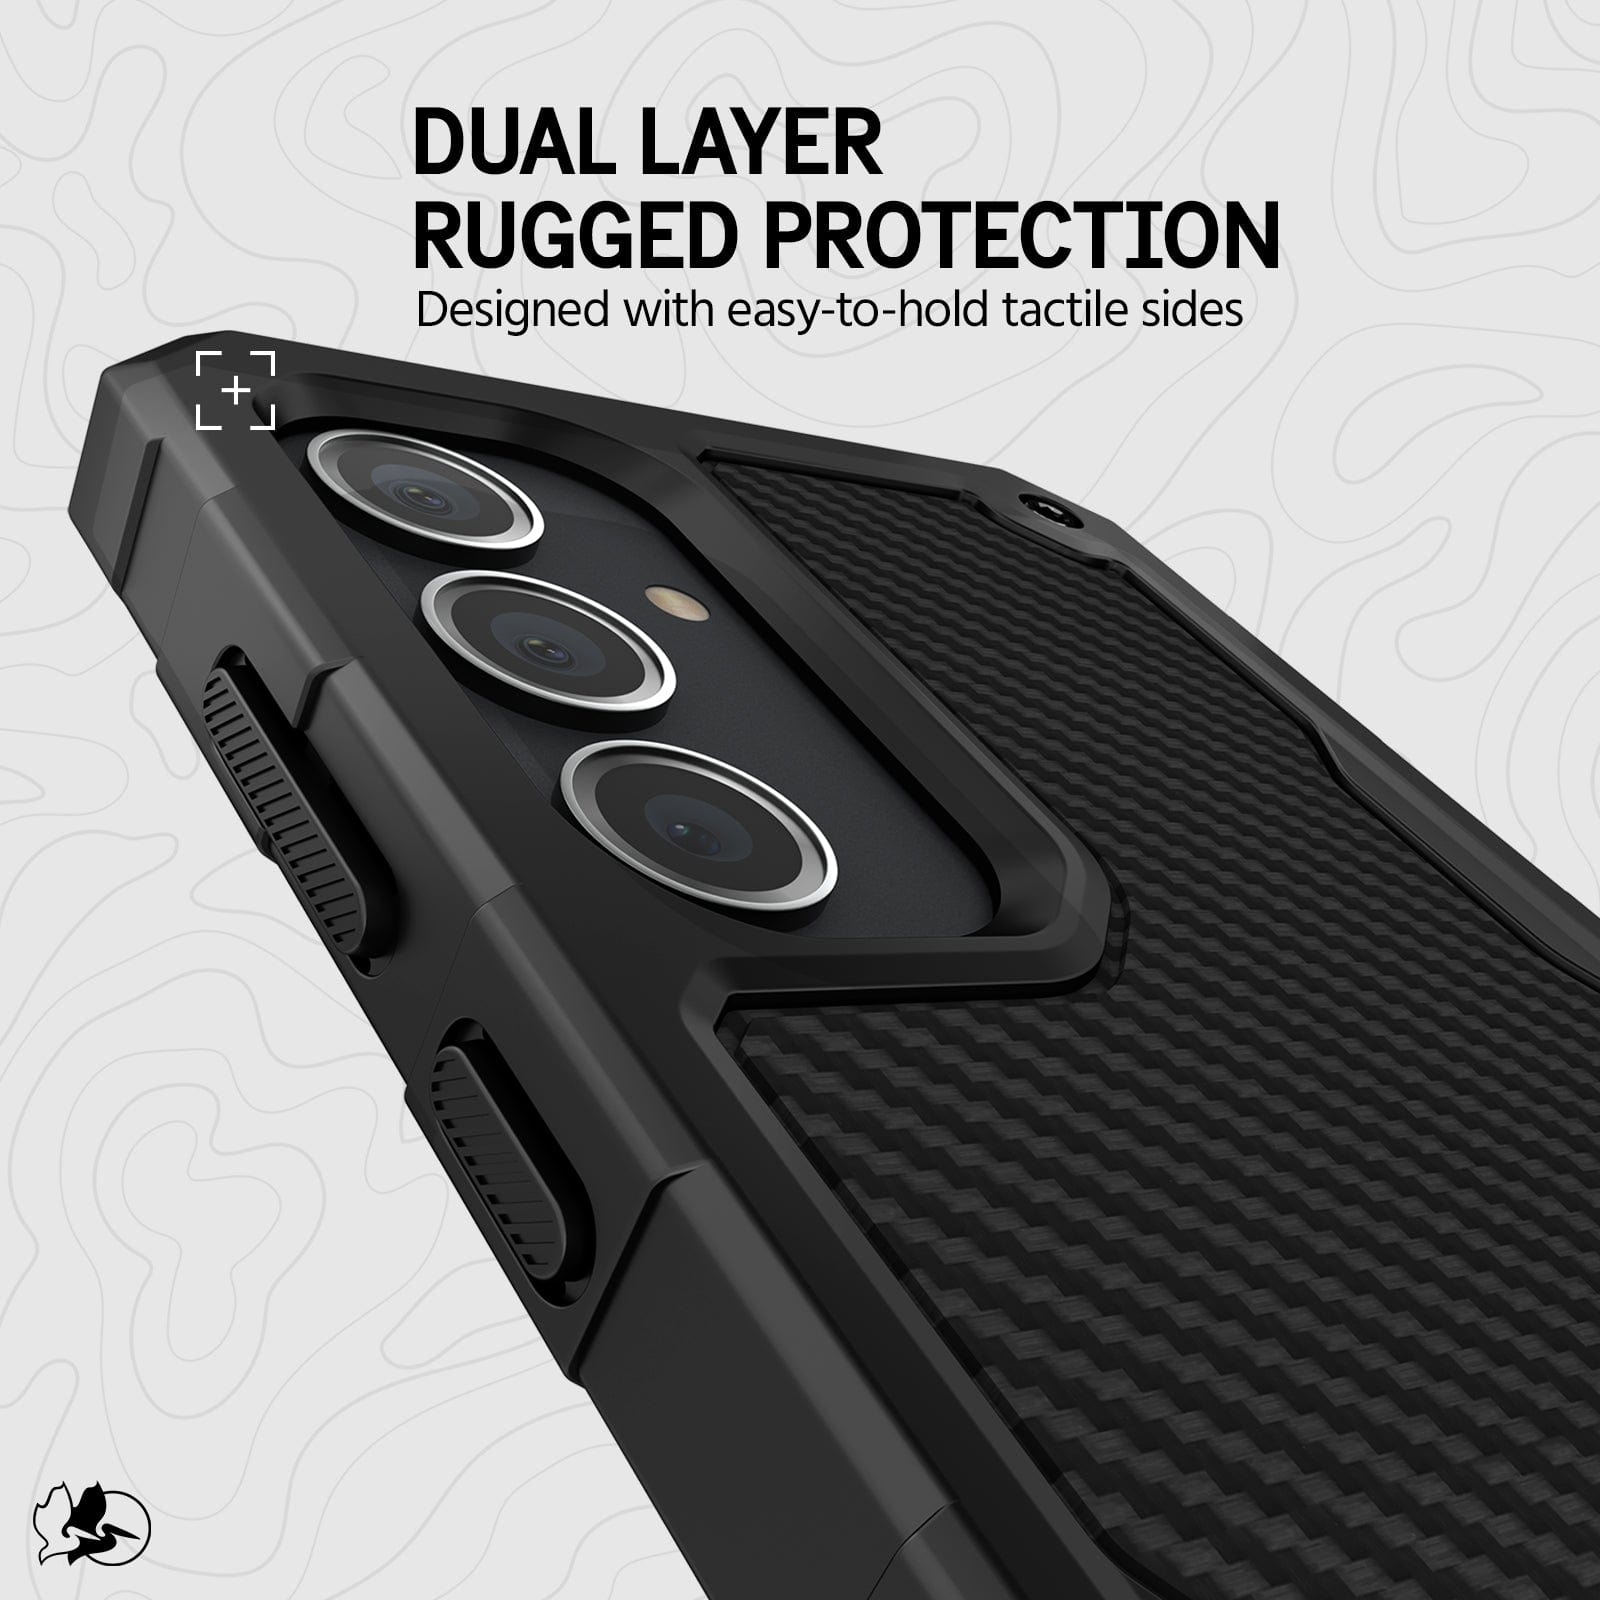 DUAL LAYER RUGGED PROTECTION. DESIGNED WITH EASY-TO-HOLD TACTILE SIDES